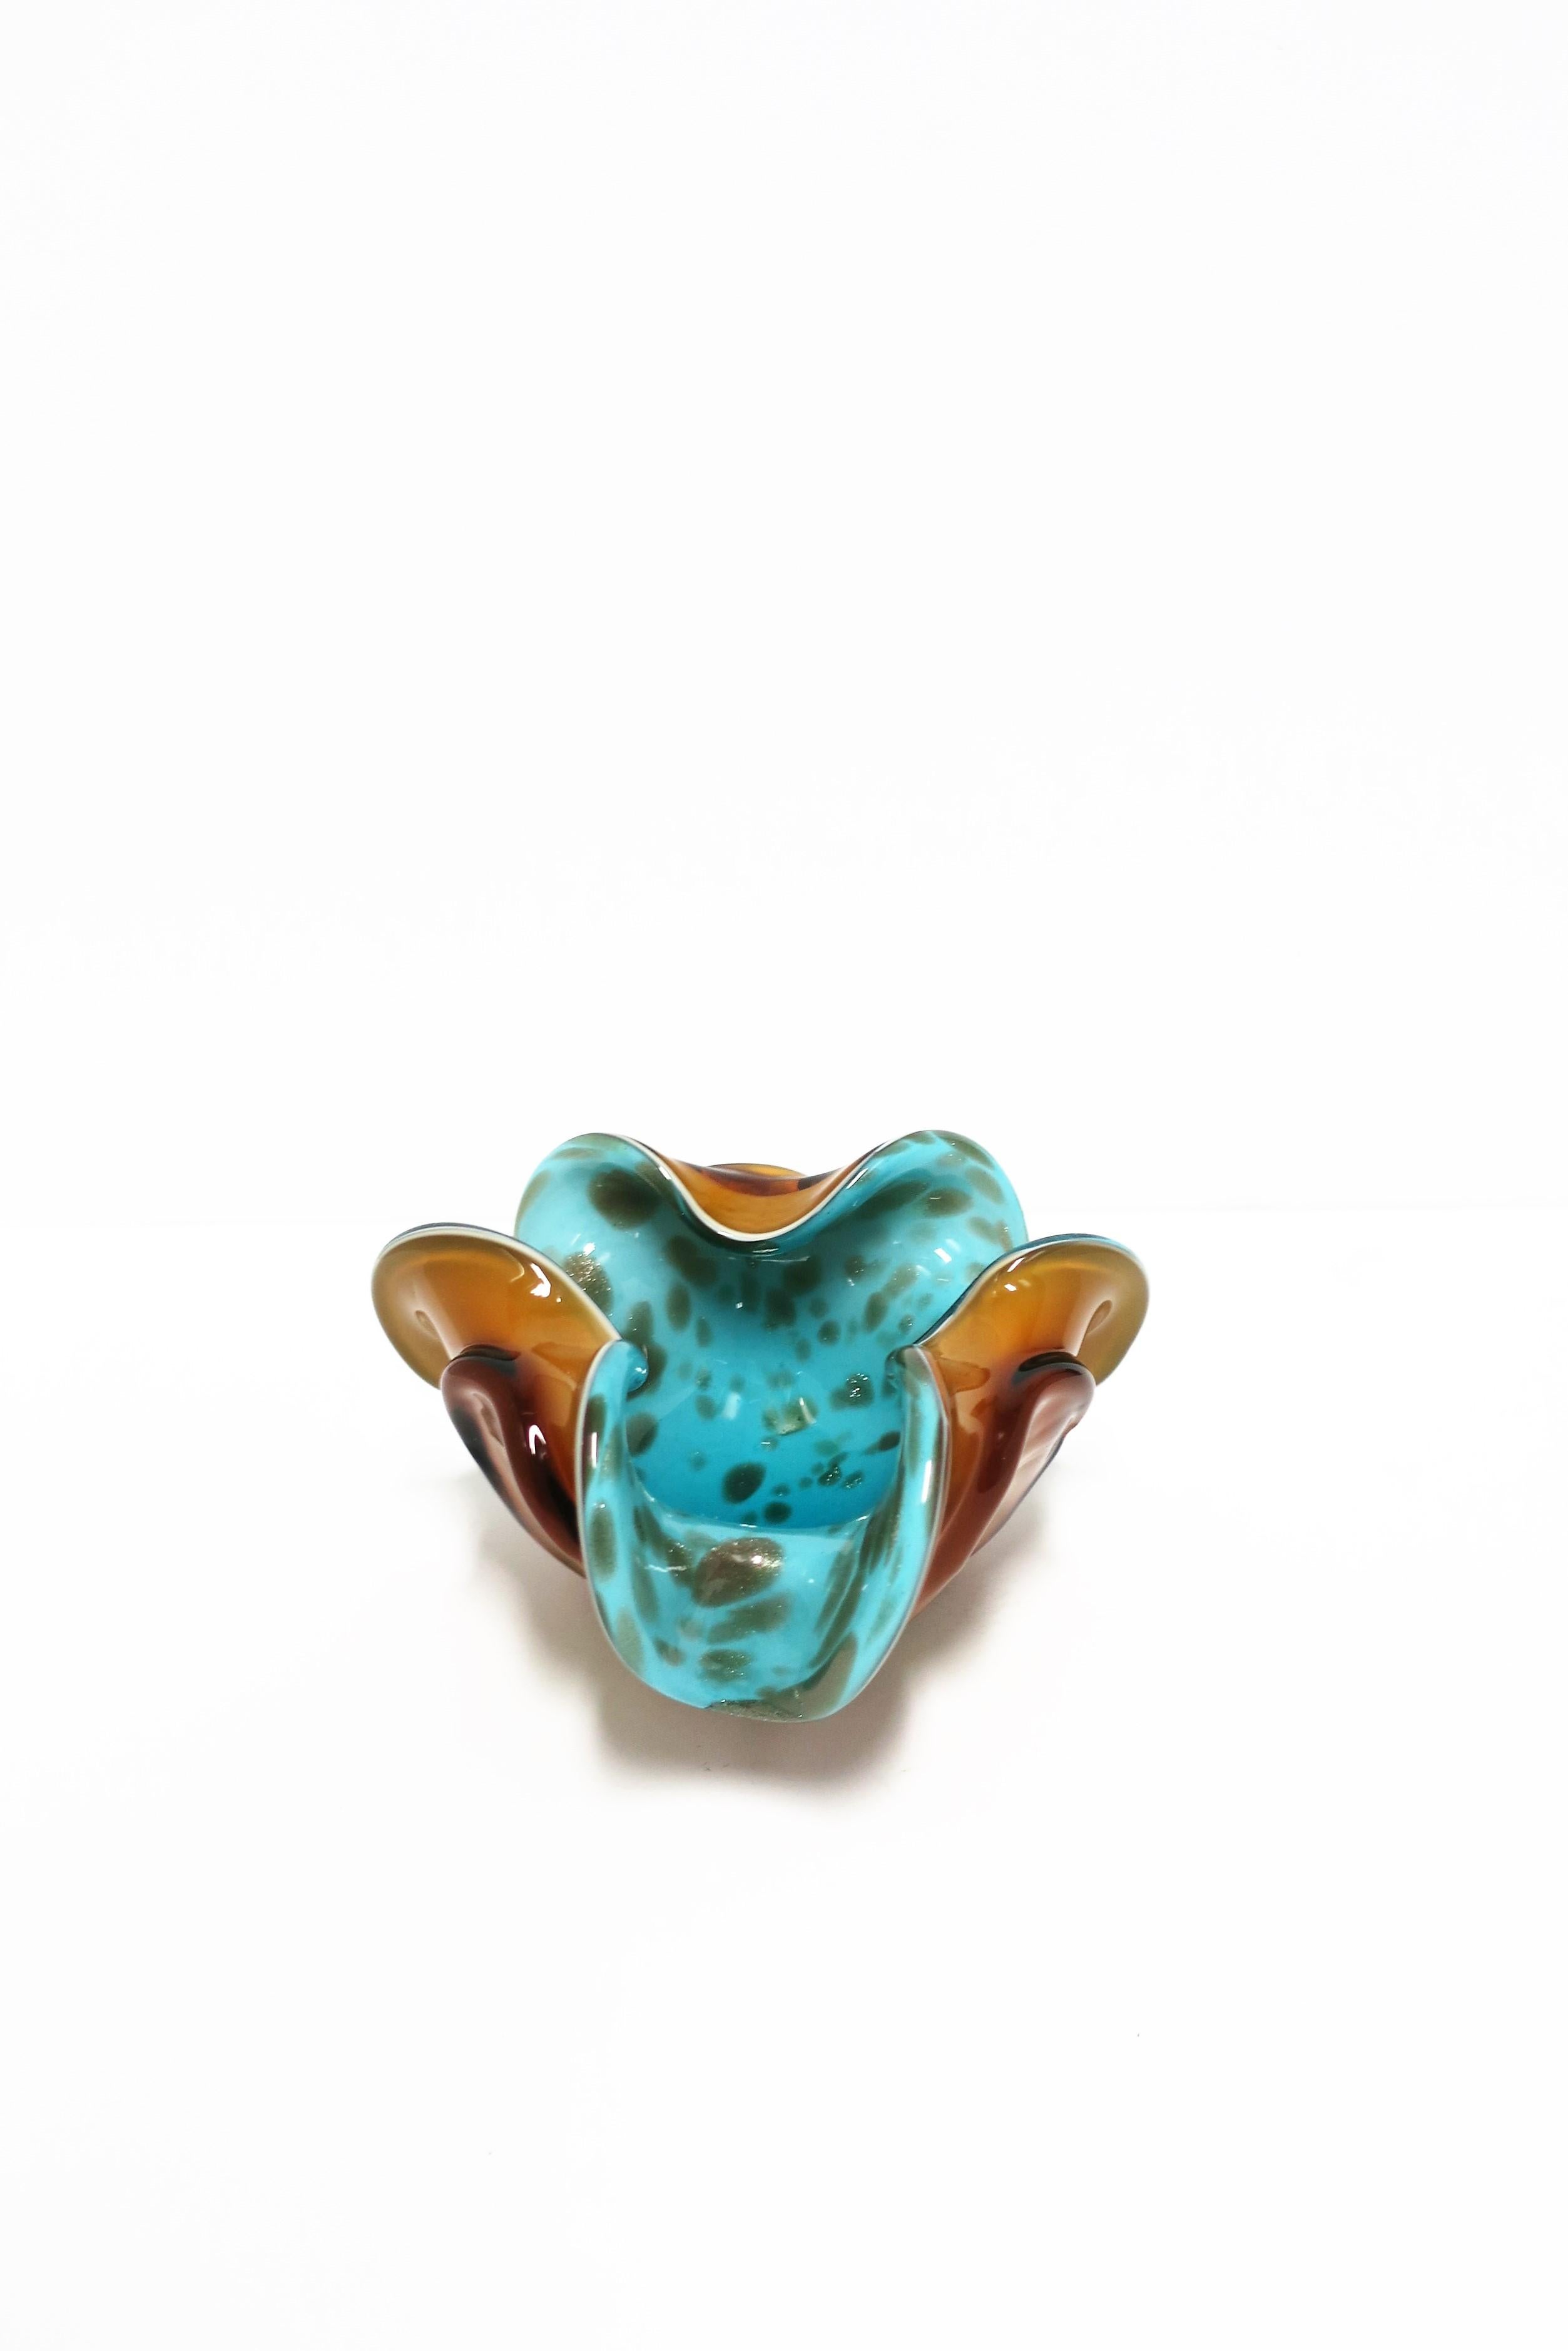 Mid-20th Century Italian Murano Art Glass Bowl in Turquoise Blue and Gold, circa 1960s